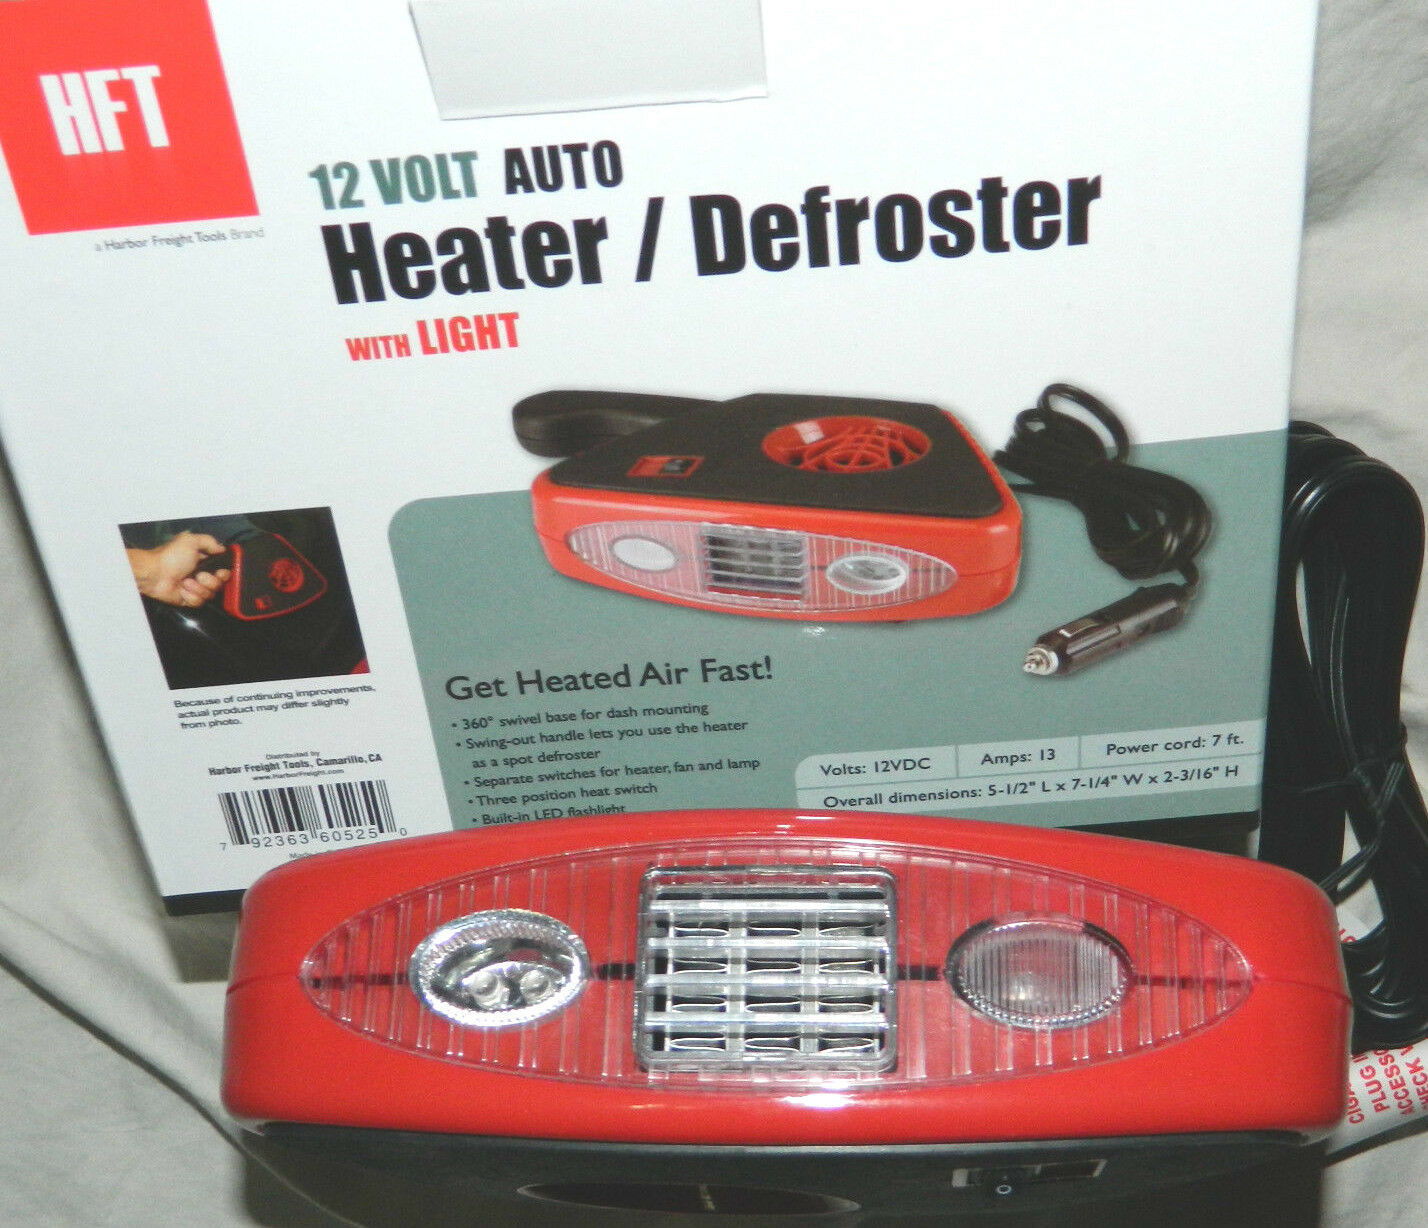 HFT Portable Car Heater Defroster 12 Volt DC with Light